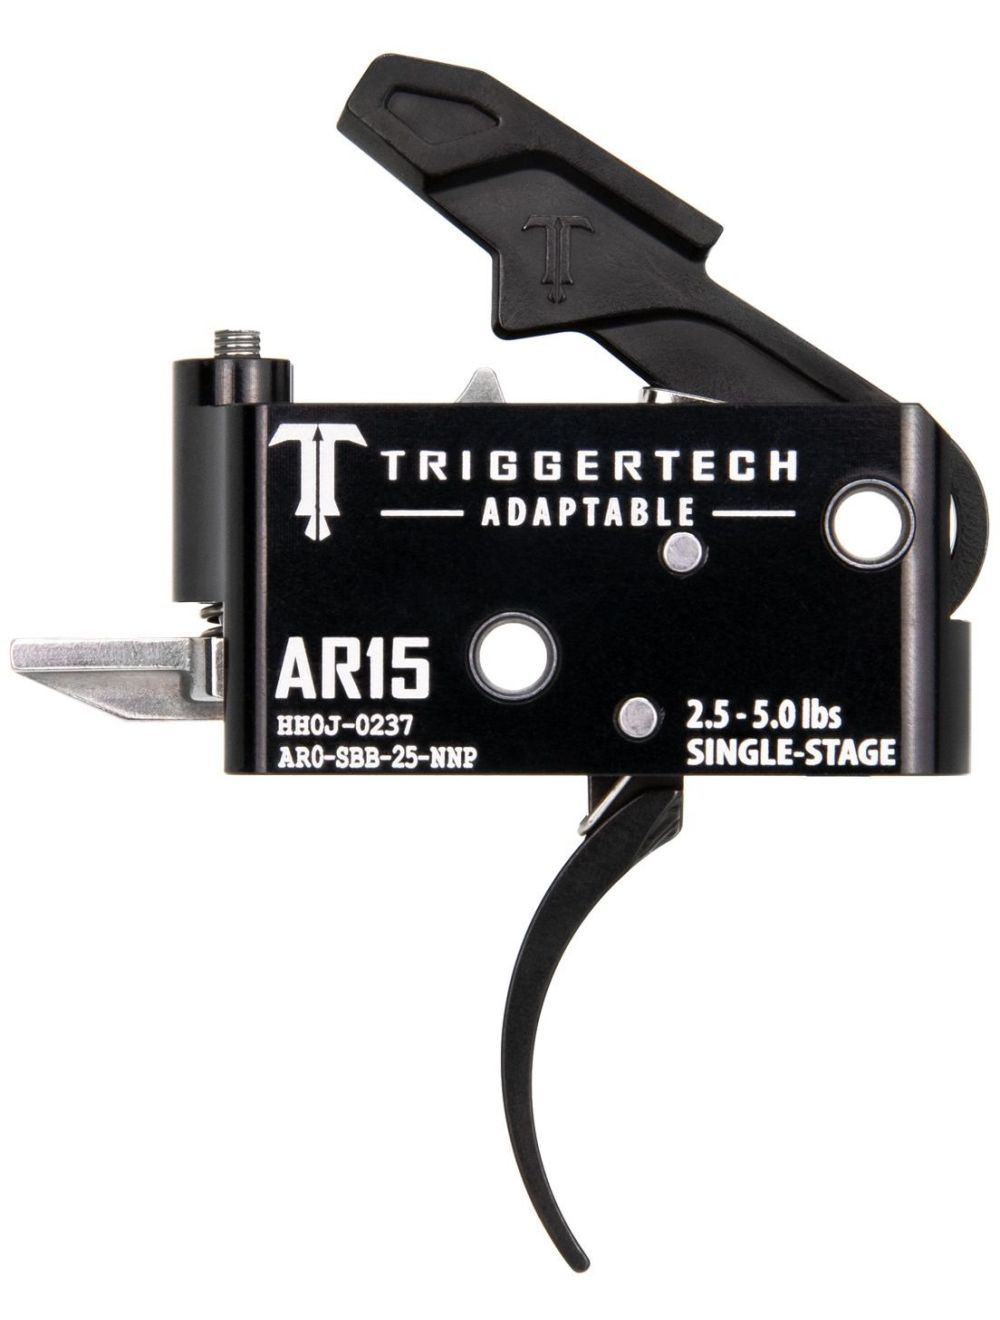 AR15 Single-Stage Adaptable Trigger